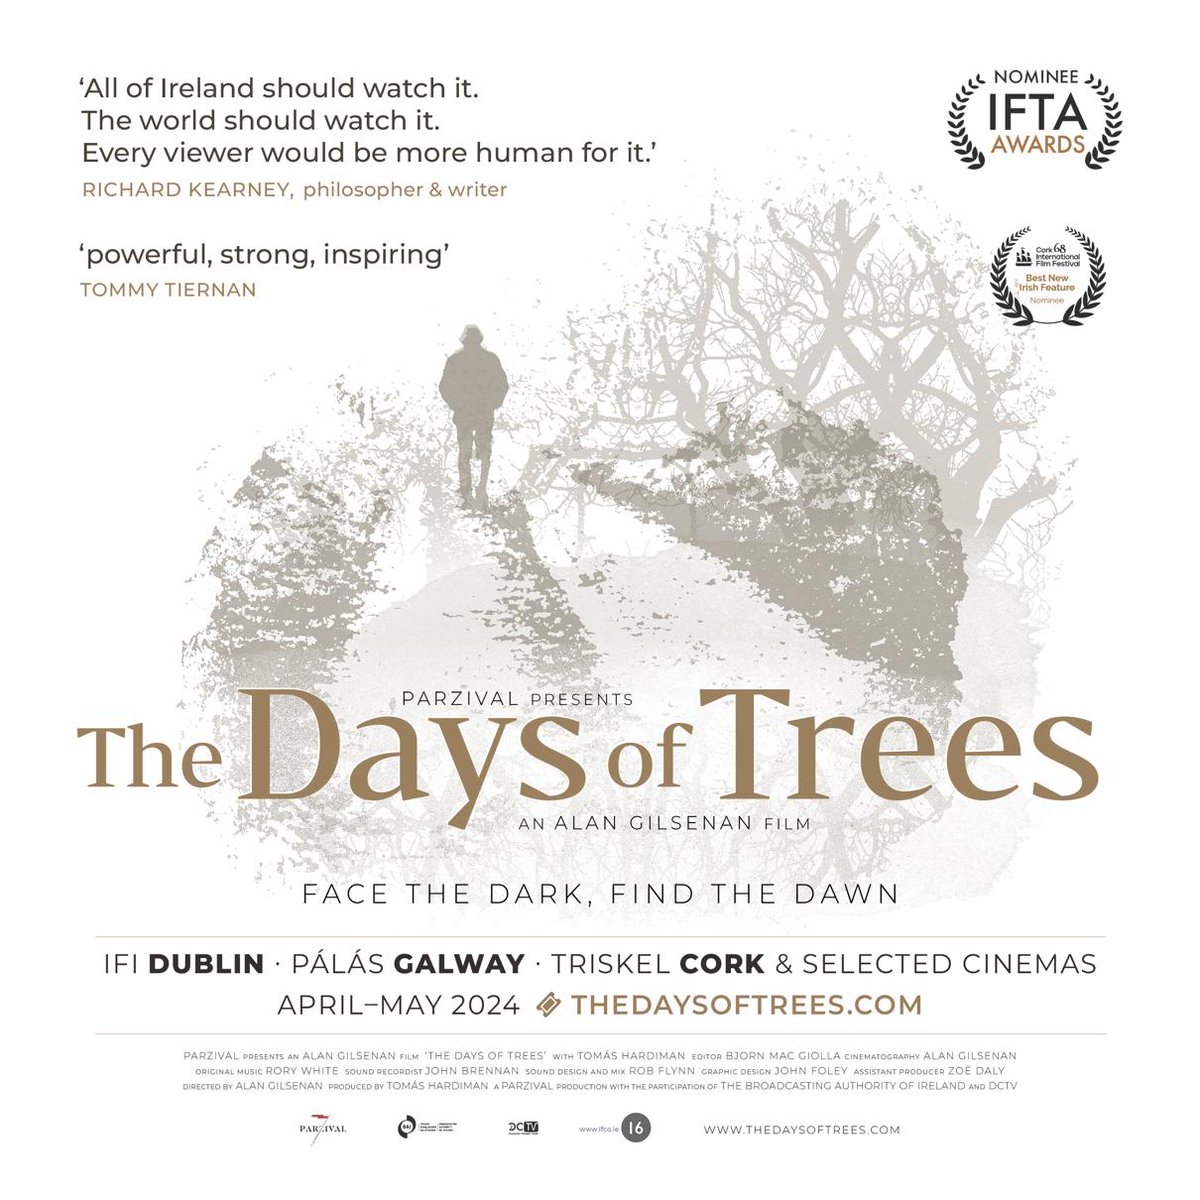 Exciting news! From acclaimed Wicklow filmmaker @AlanGilsenan1 , comes a poetic and deeply moving film, filmed on location at the beautiful Glenstal Abbey. Don't miss the opening at @IFI_Dub on Friday, April 12th. Save the date and prepare to be captivated! #IrishFilm